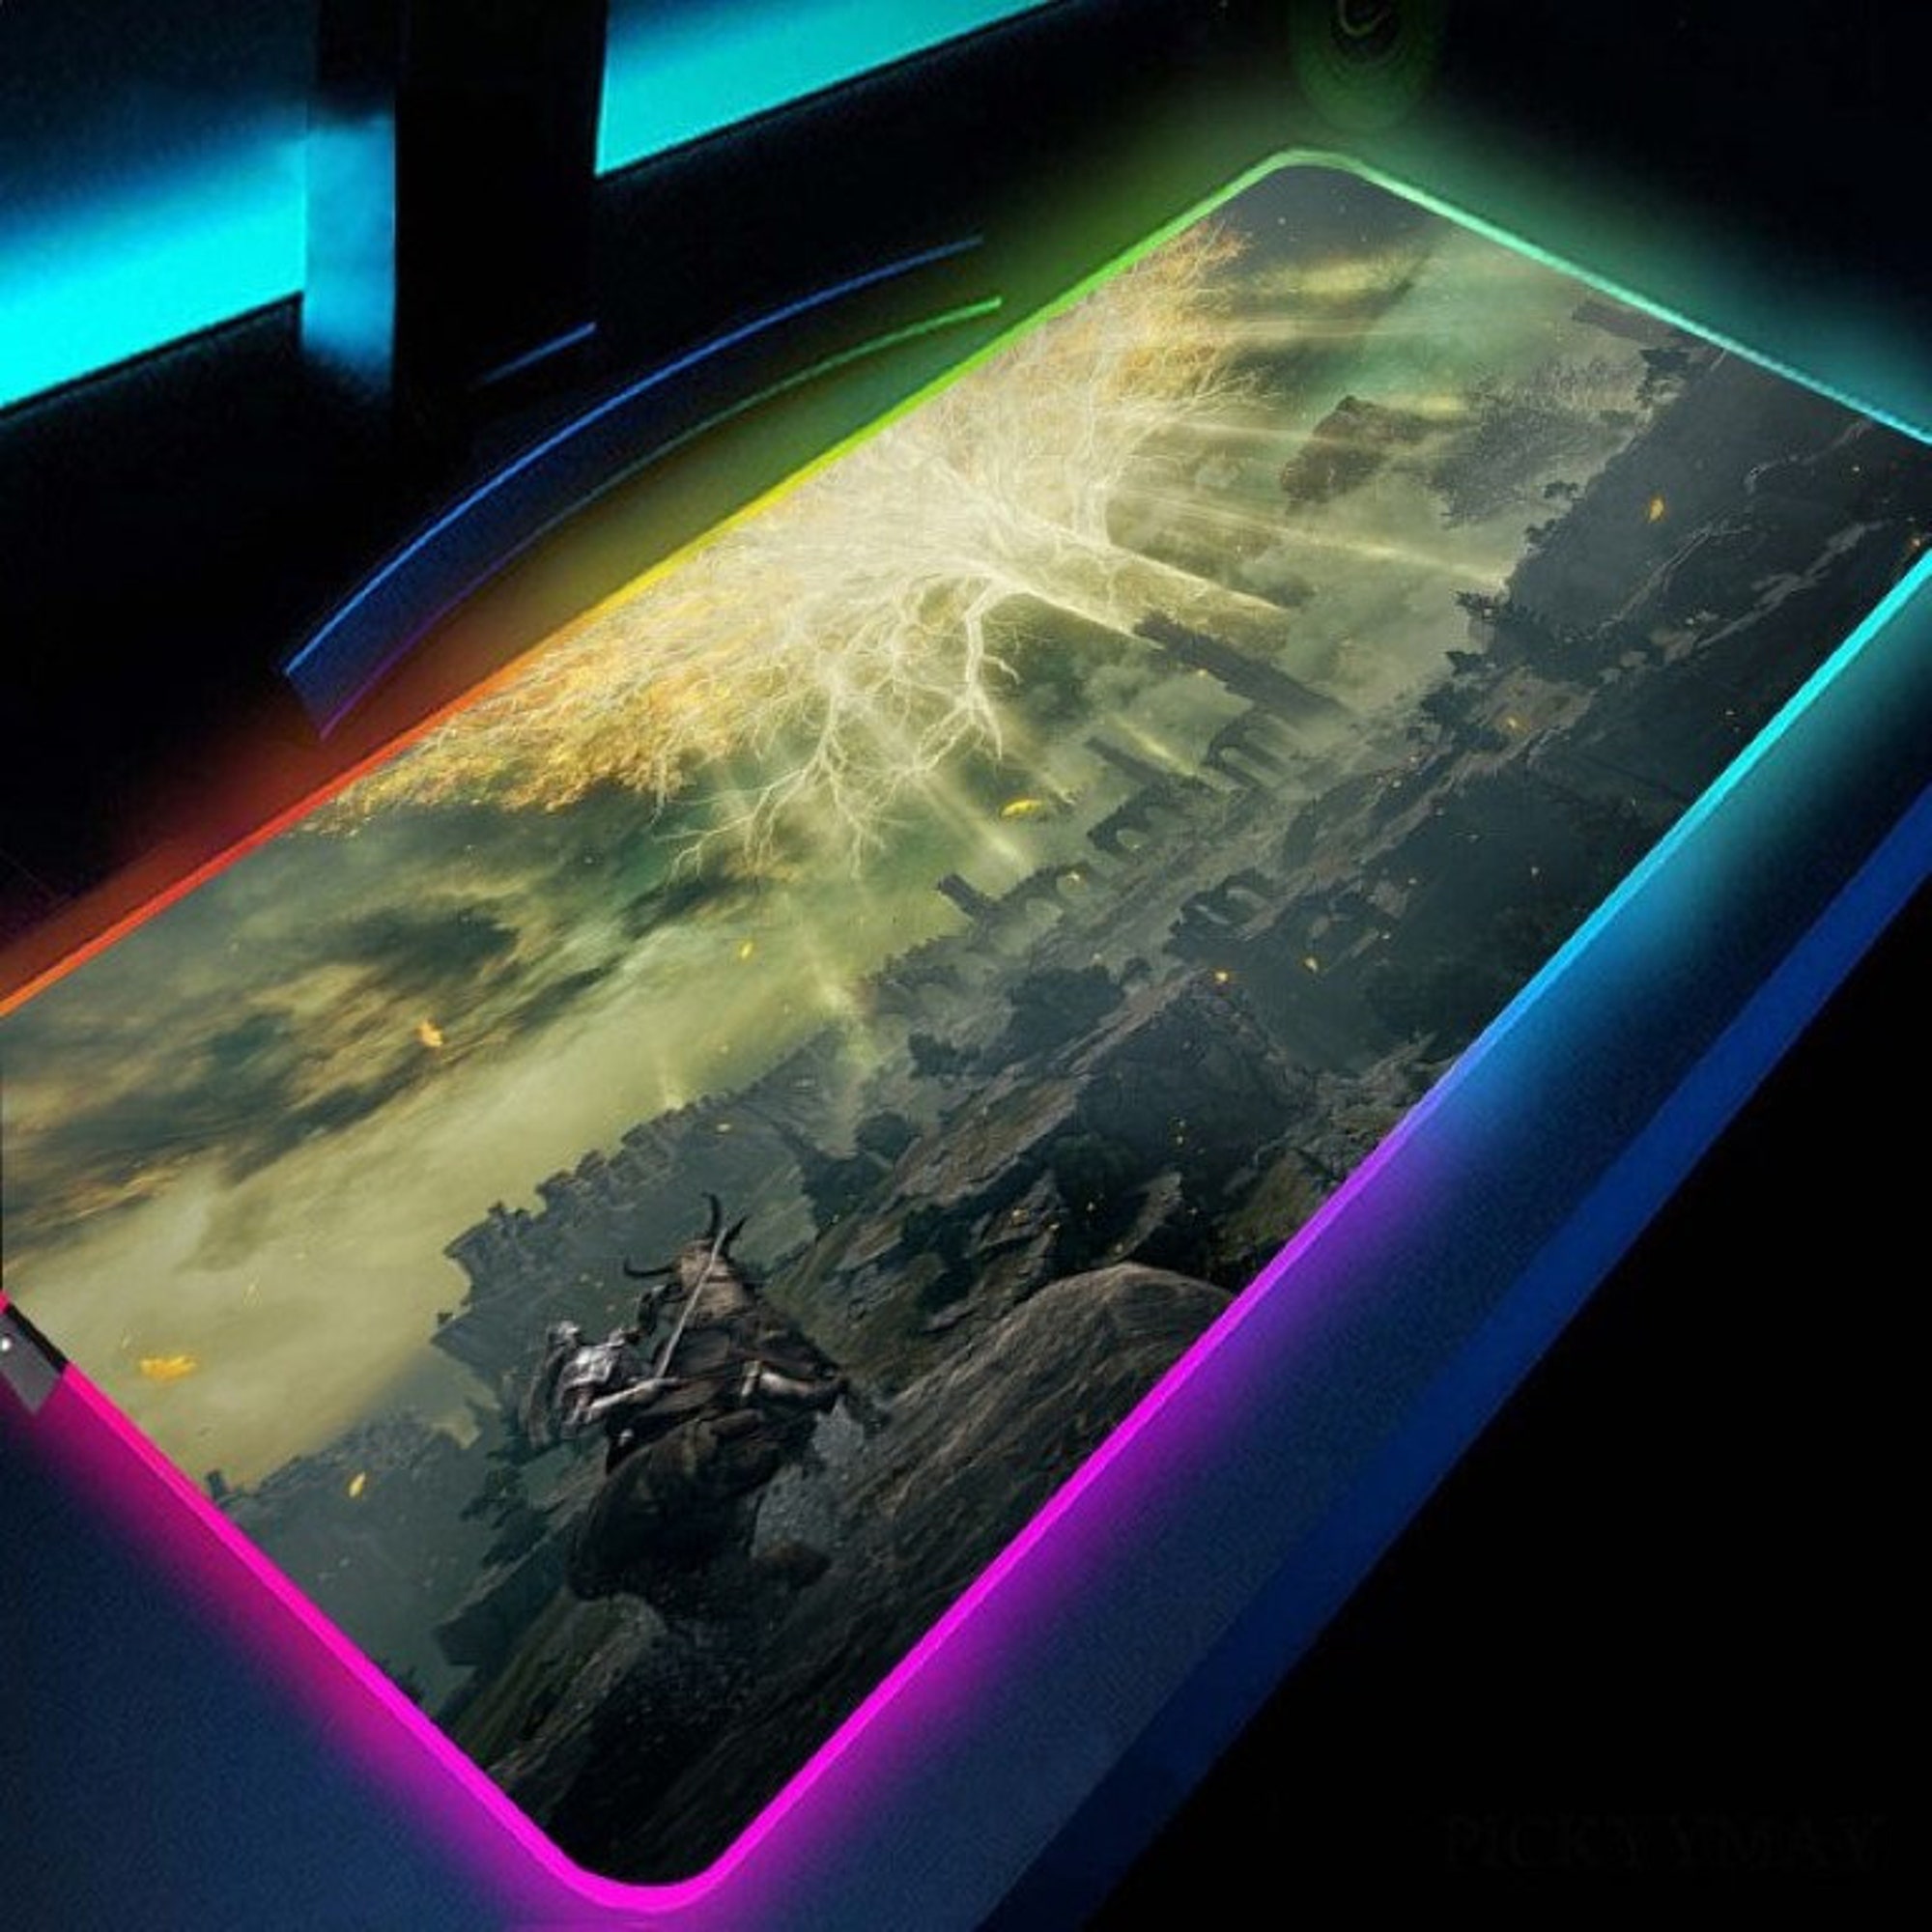 Elden Ring Gaming LED Mouse Pad RGB Backlight Computer Mouse